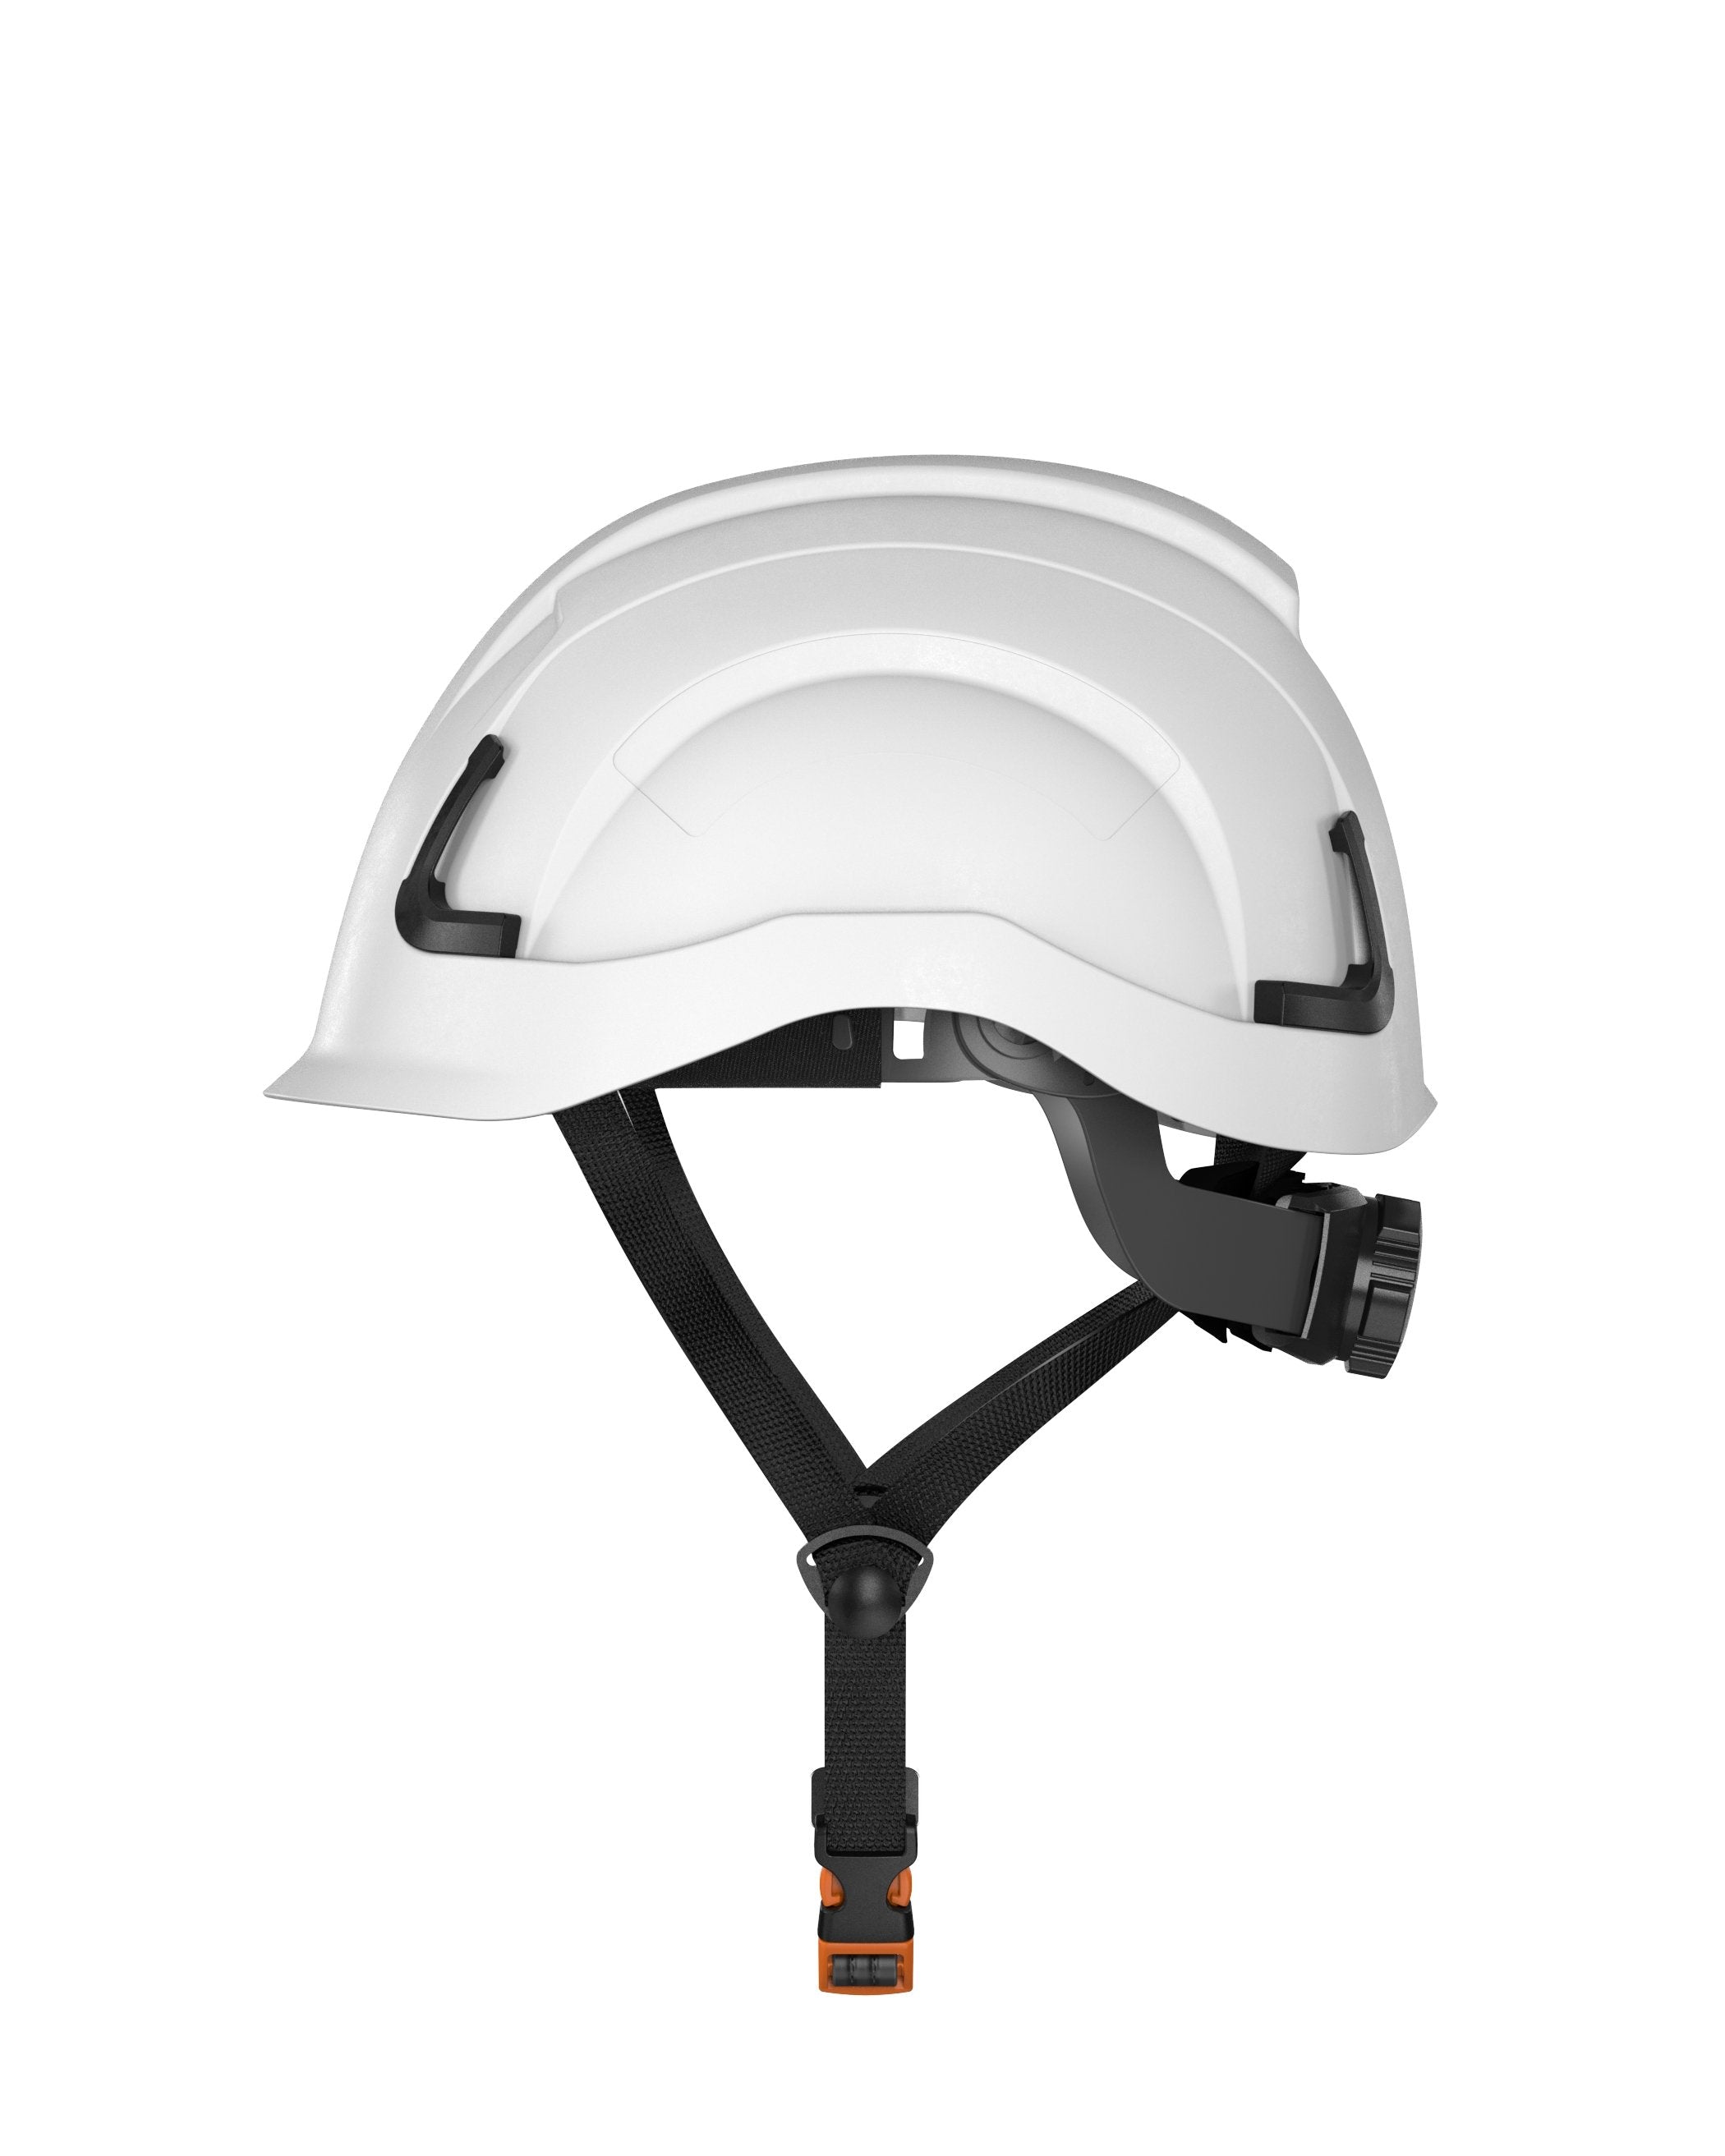 H2-EHV Safety Helmet w/ TINTED Visor Type 2 Class E, ANSI Z89 and EN12492 rated - Defender Safety